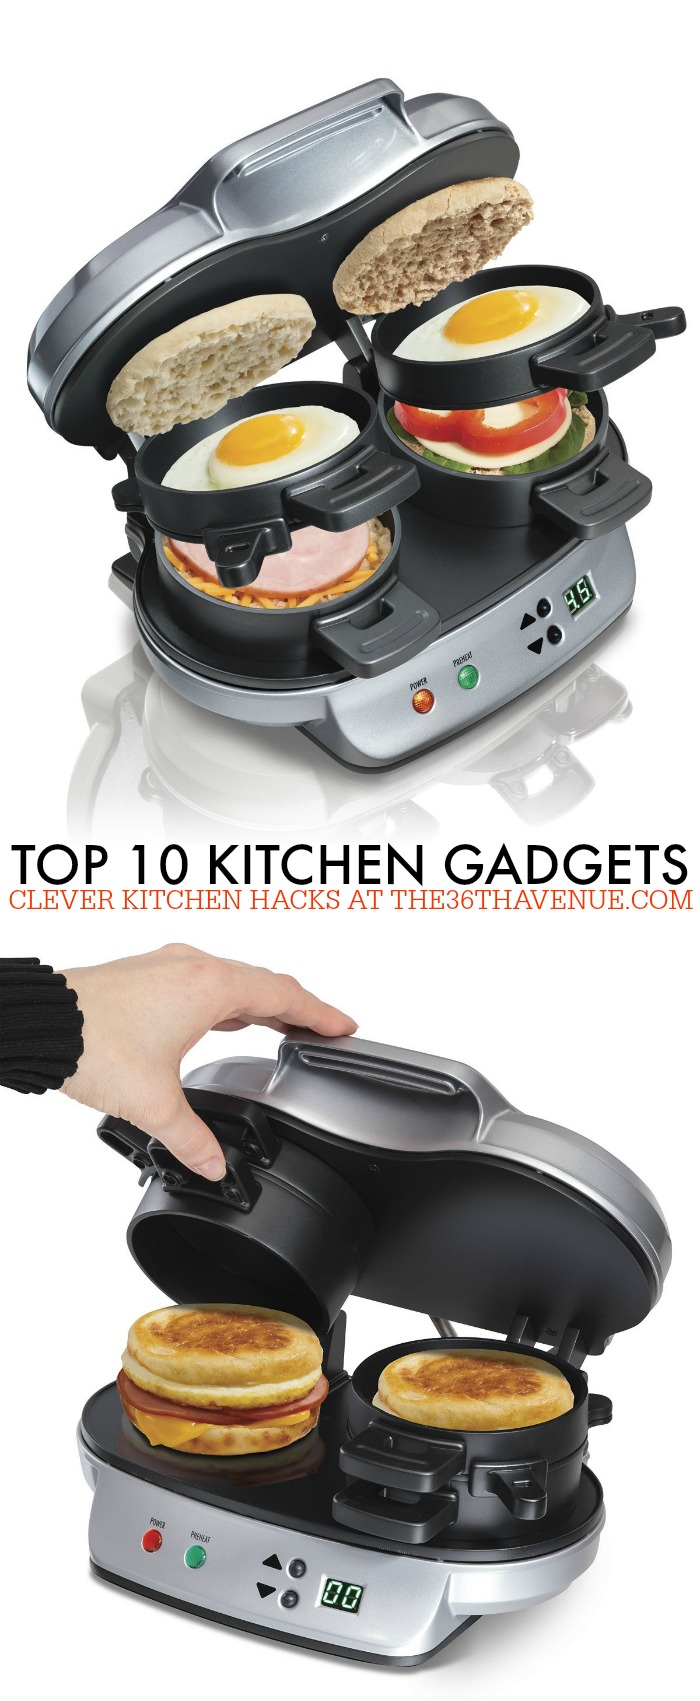 https://www.the36thavenue.com/wp-content/uploads/2015/03/Top-10-Kitchen-Gadgets-at-the36thavenue.com-3.jpg